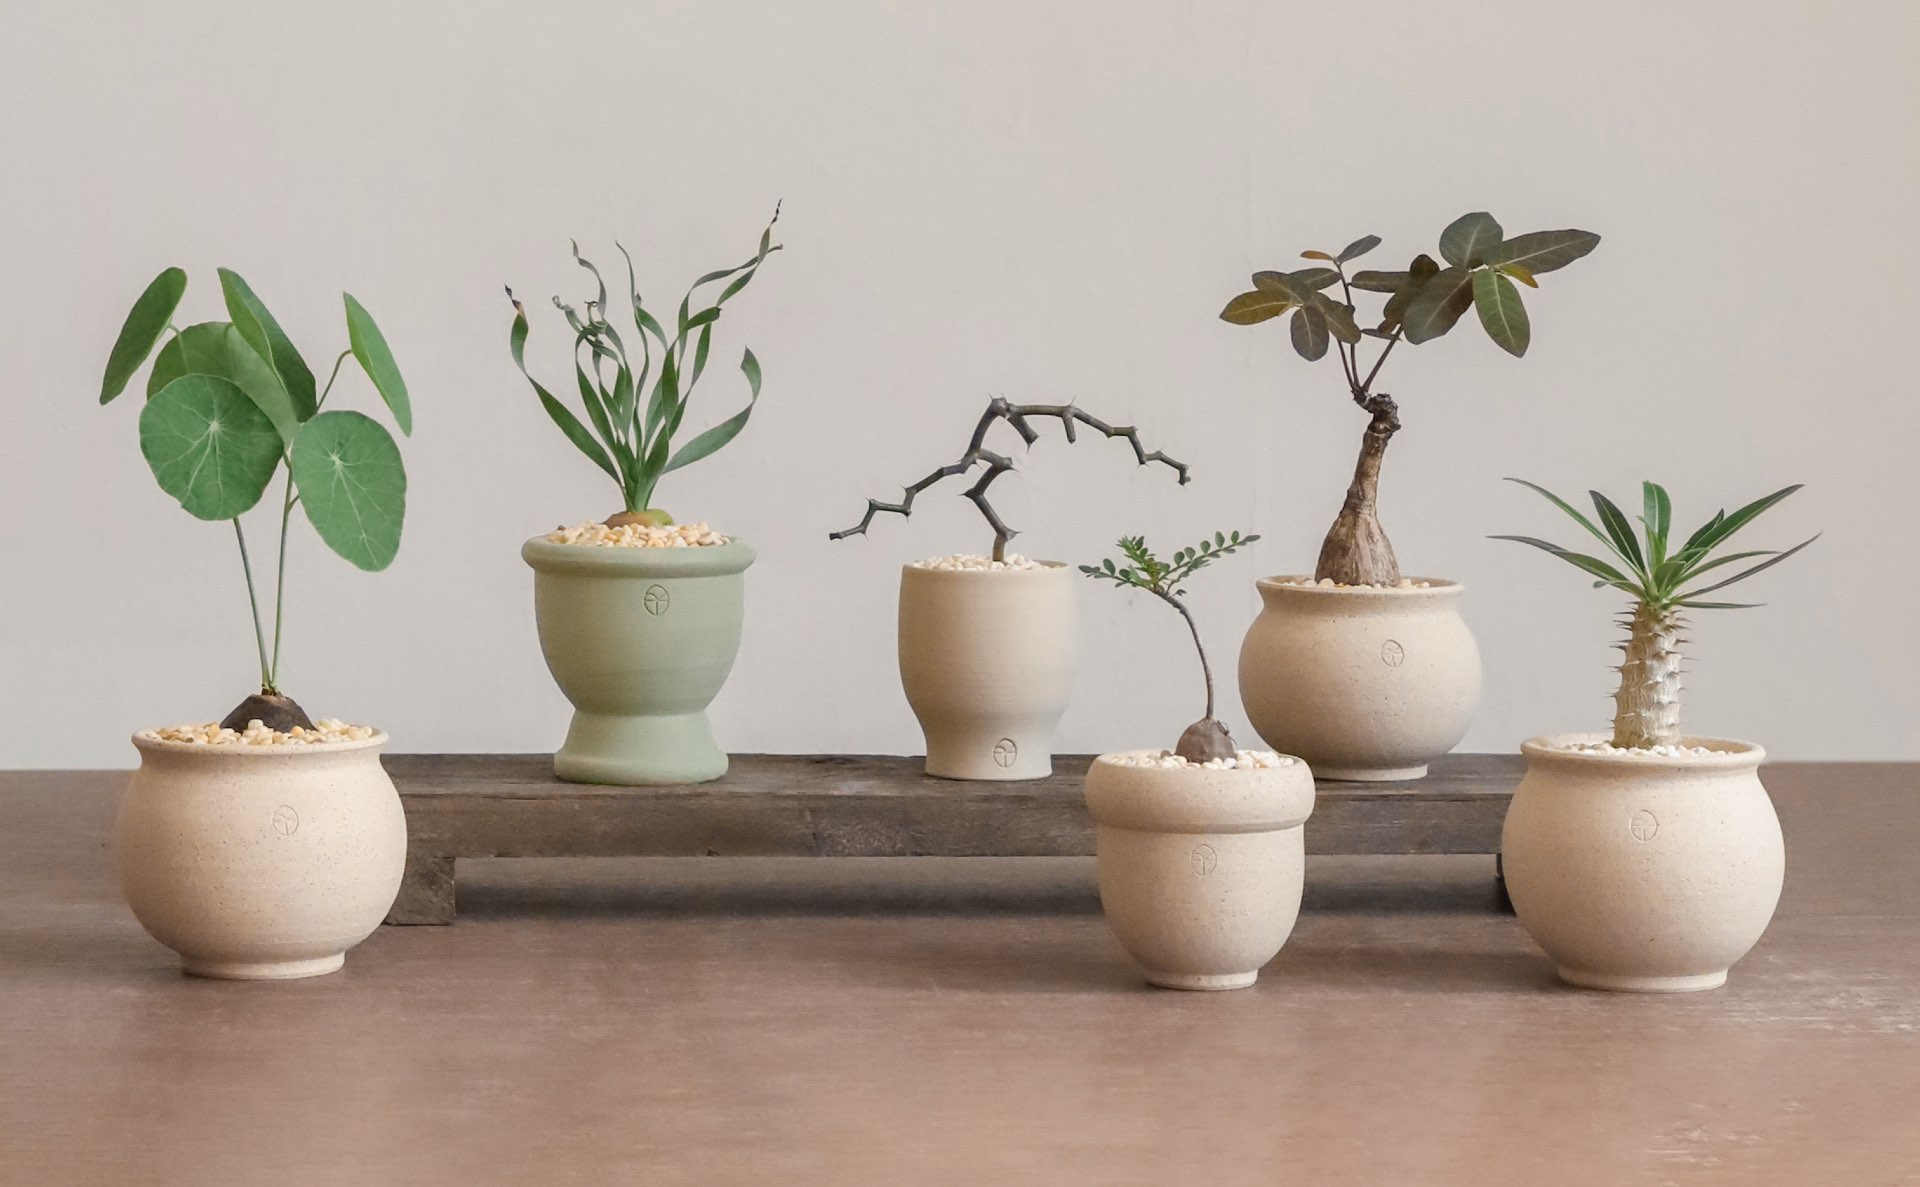 , Lifestyle collective New Bahru’s Sneak Peek event has bonsai styling and leather upcycling workshops